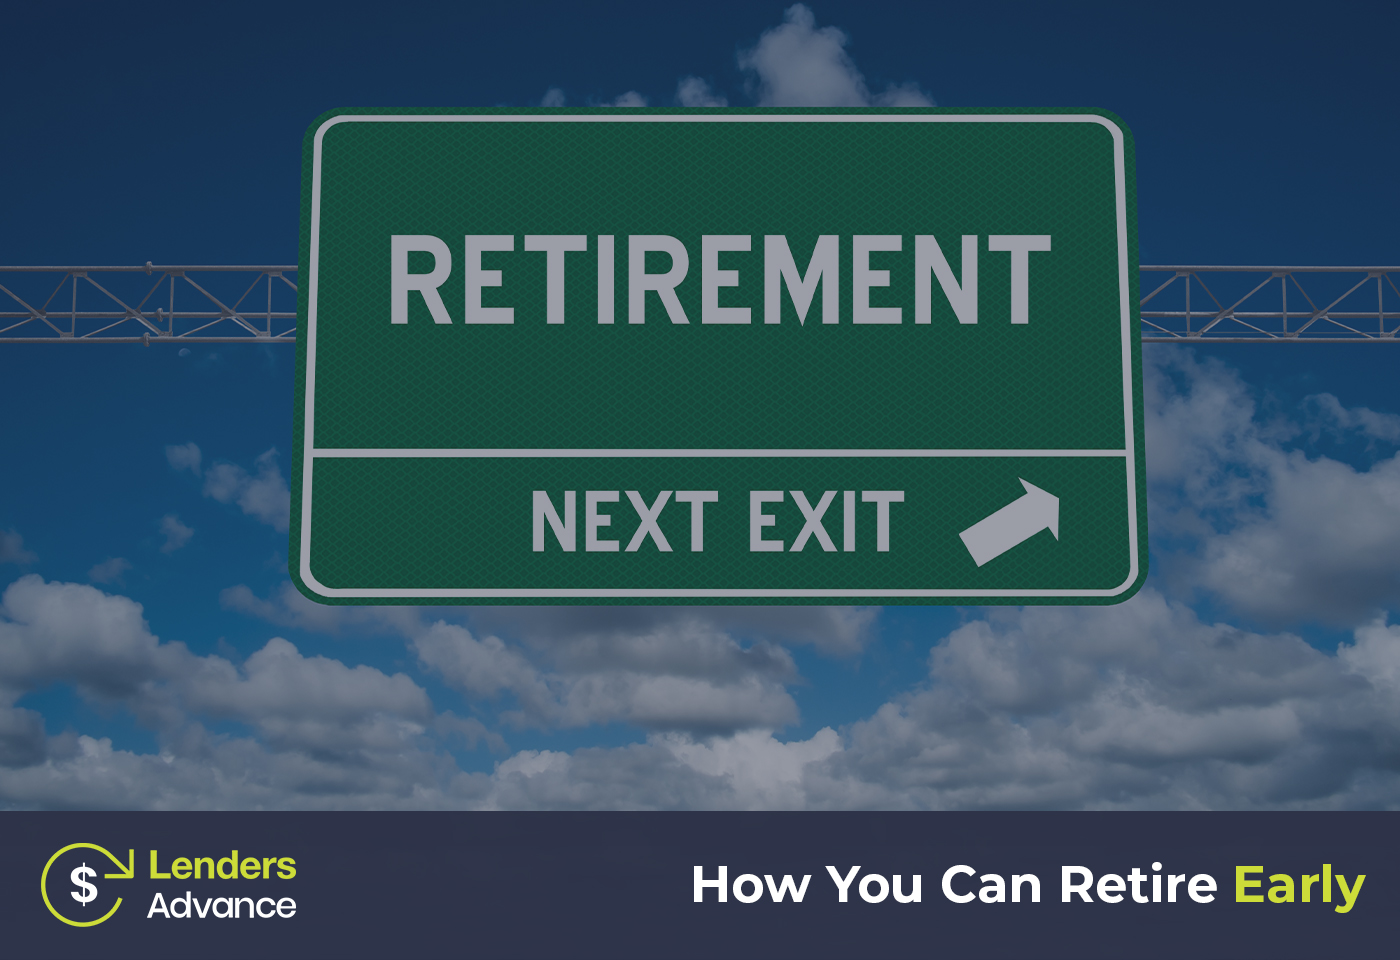 How You Can Retire Early